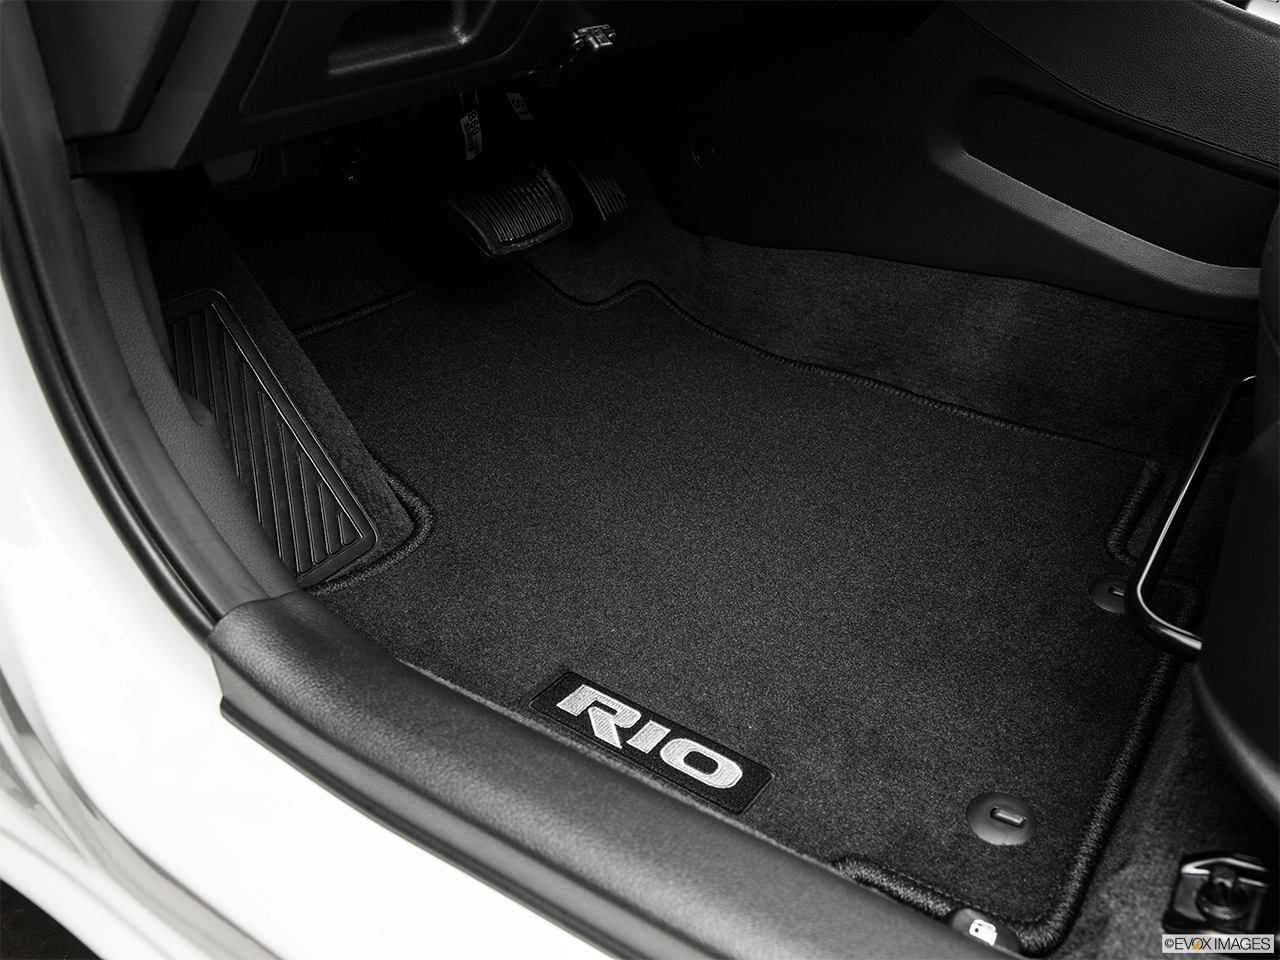 2016 Kia Rio 5-door LX Driver's floor mat and pedals. Mid-seat level from outside looking in. 